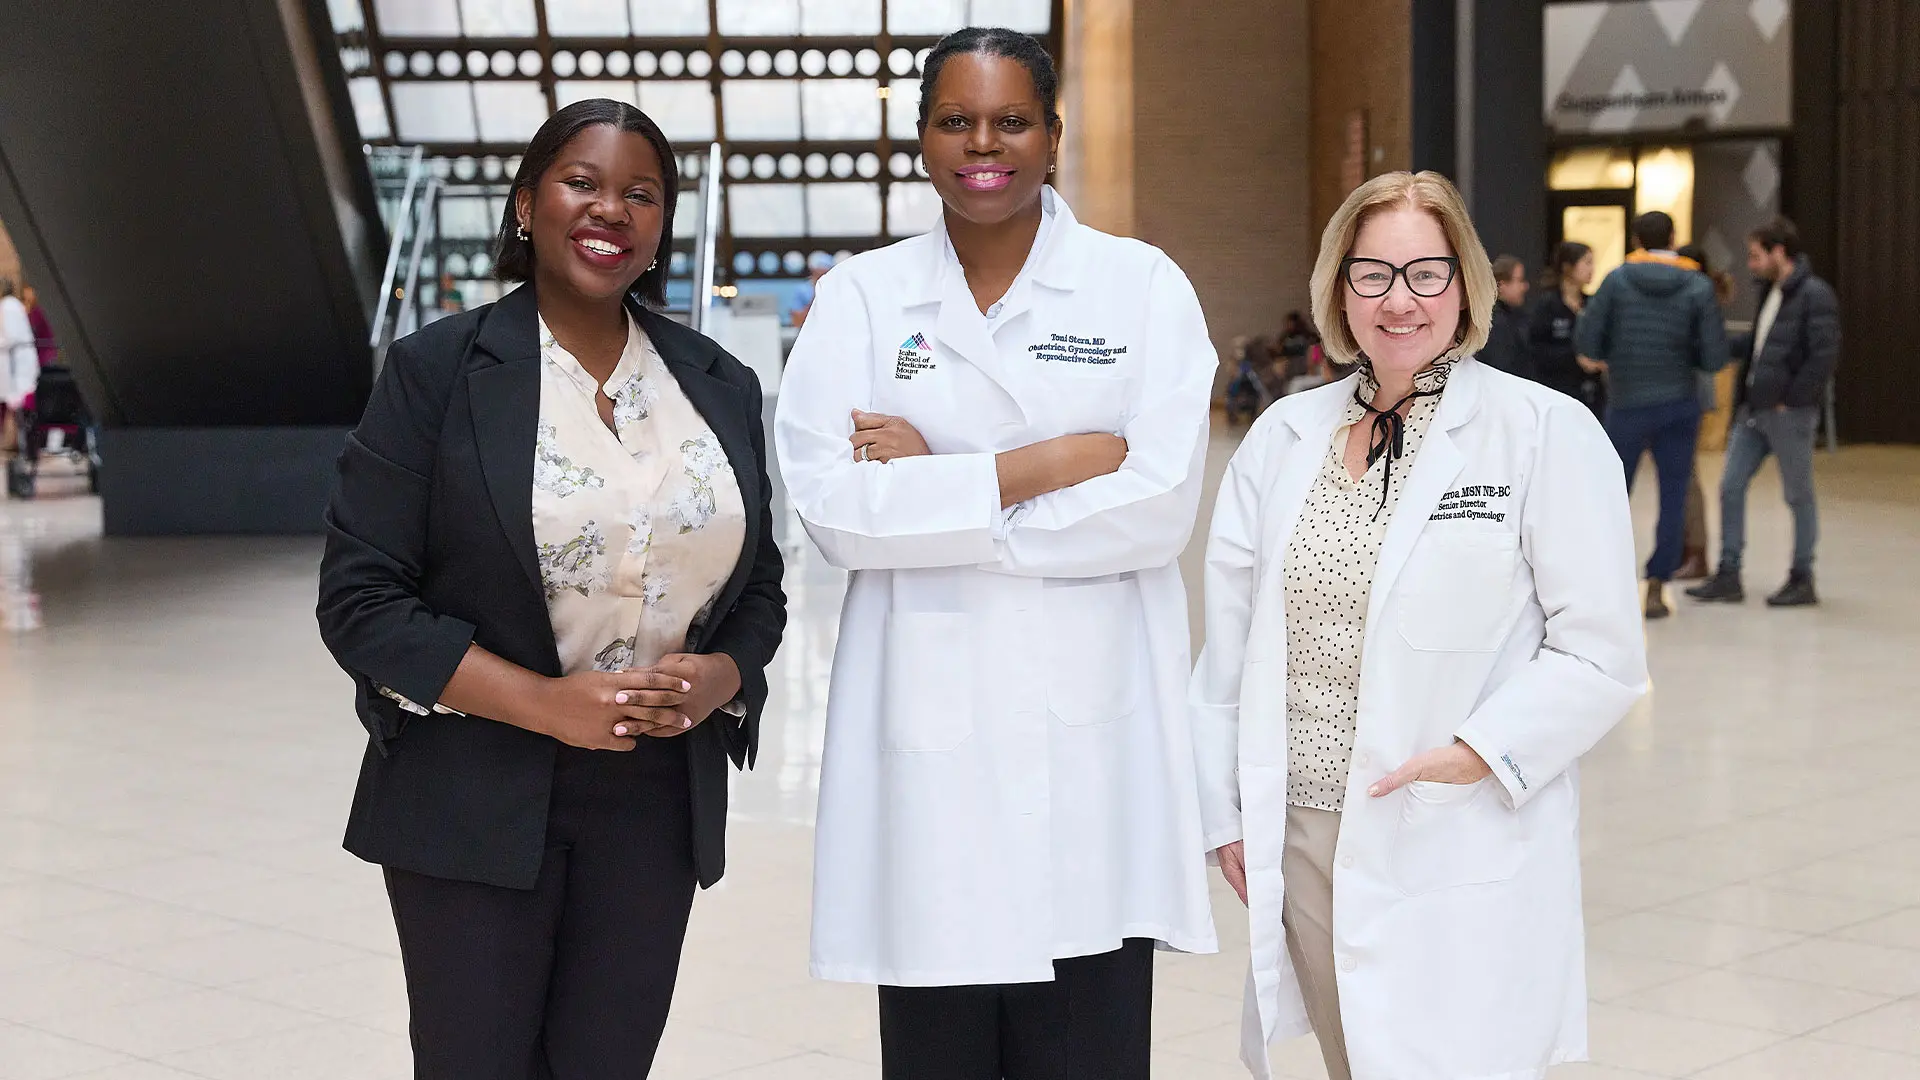 From left: Thandiwe Kangwa, MPA, CPXP, Toni A. Stern, MD, MS, MBA, and Erin Figueroa, MSN, RN, NE-BC.